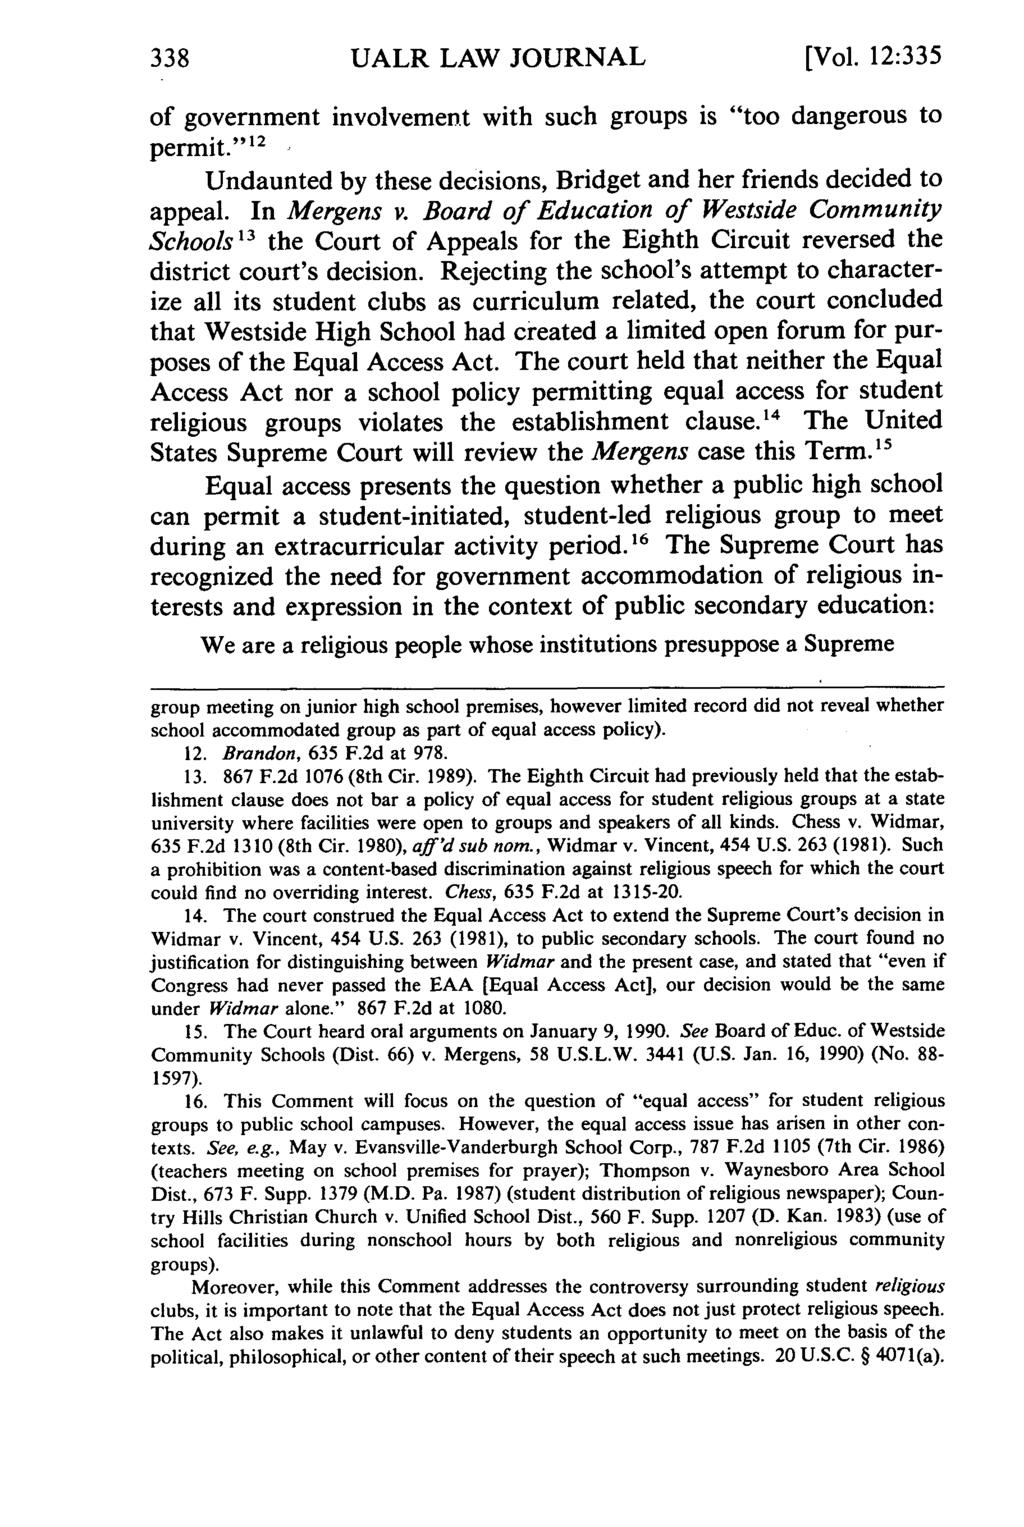 UALR LAW JOURNAL [Vol. 12:335 of government involvement with such groups is "too dangerous to permit." 12 Undaunted by these decisions, Bridget and her friends decided to appeal. In Mergens v.